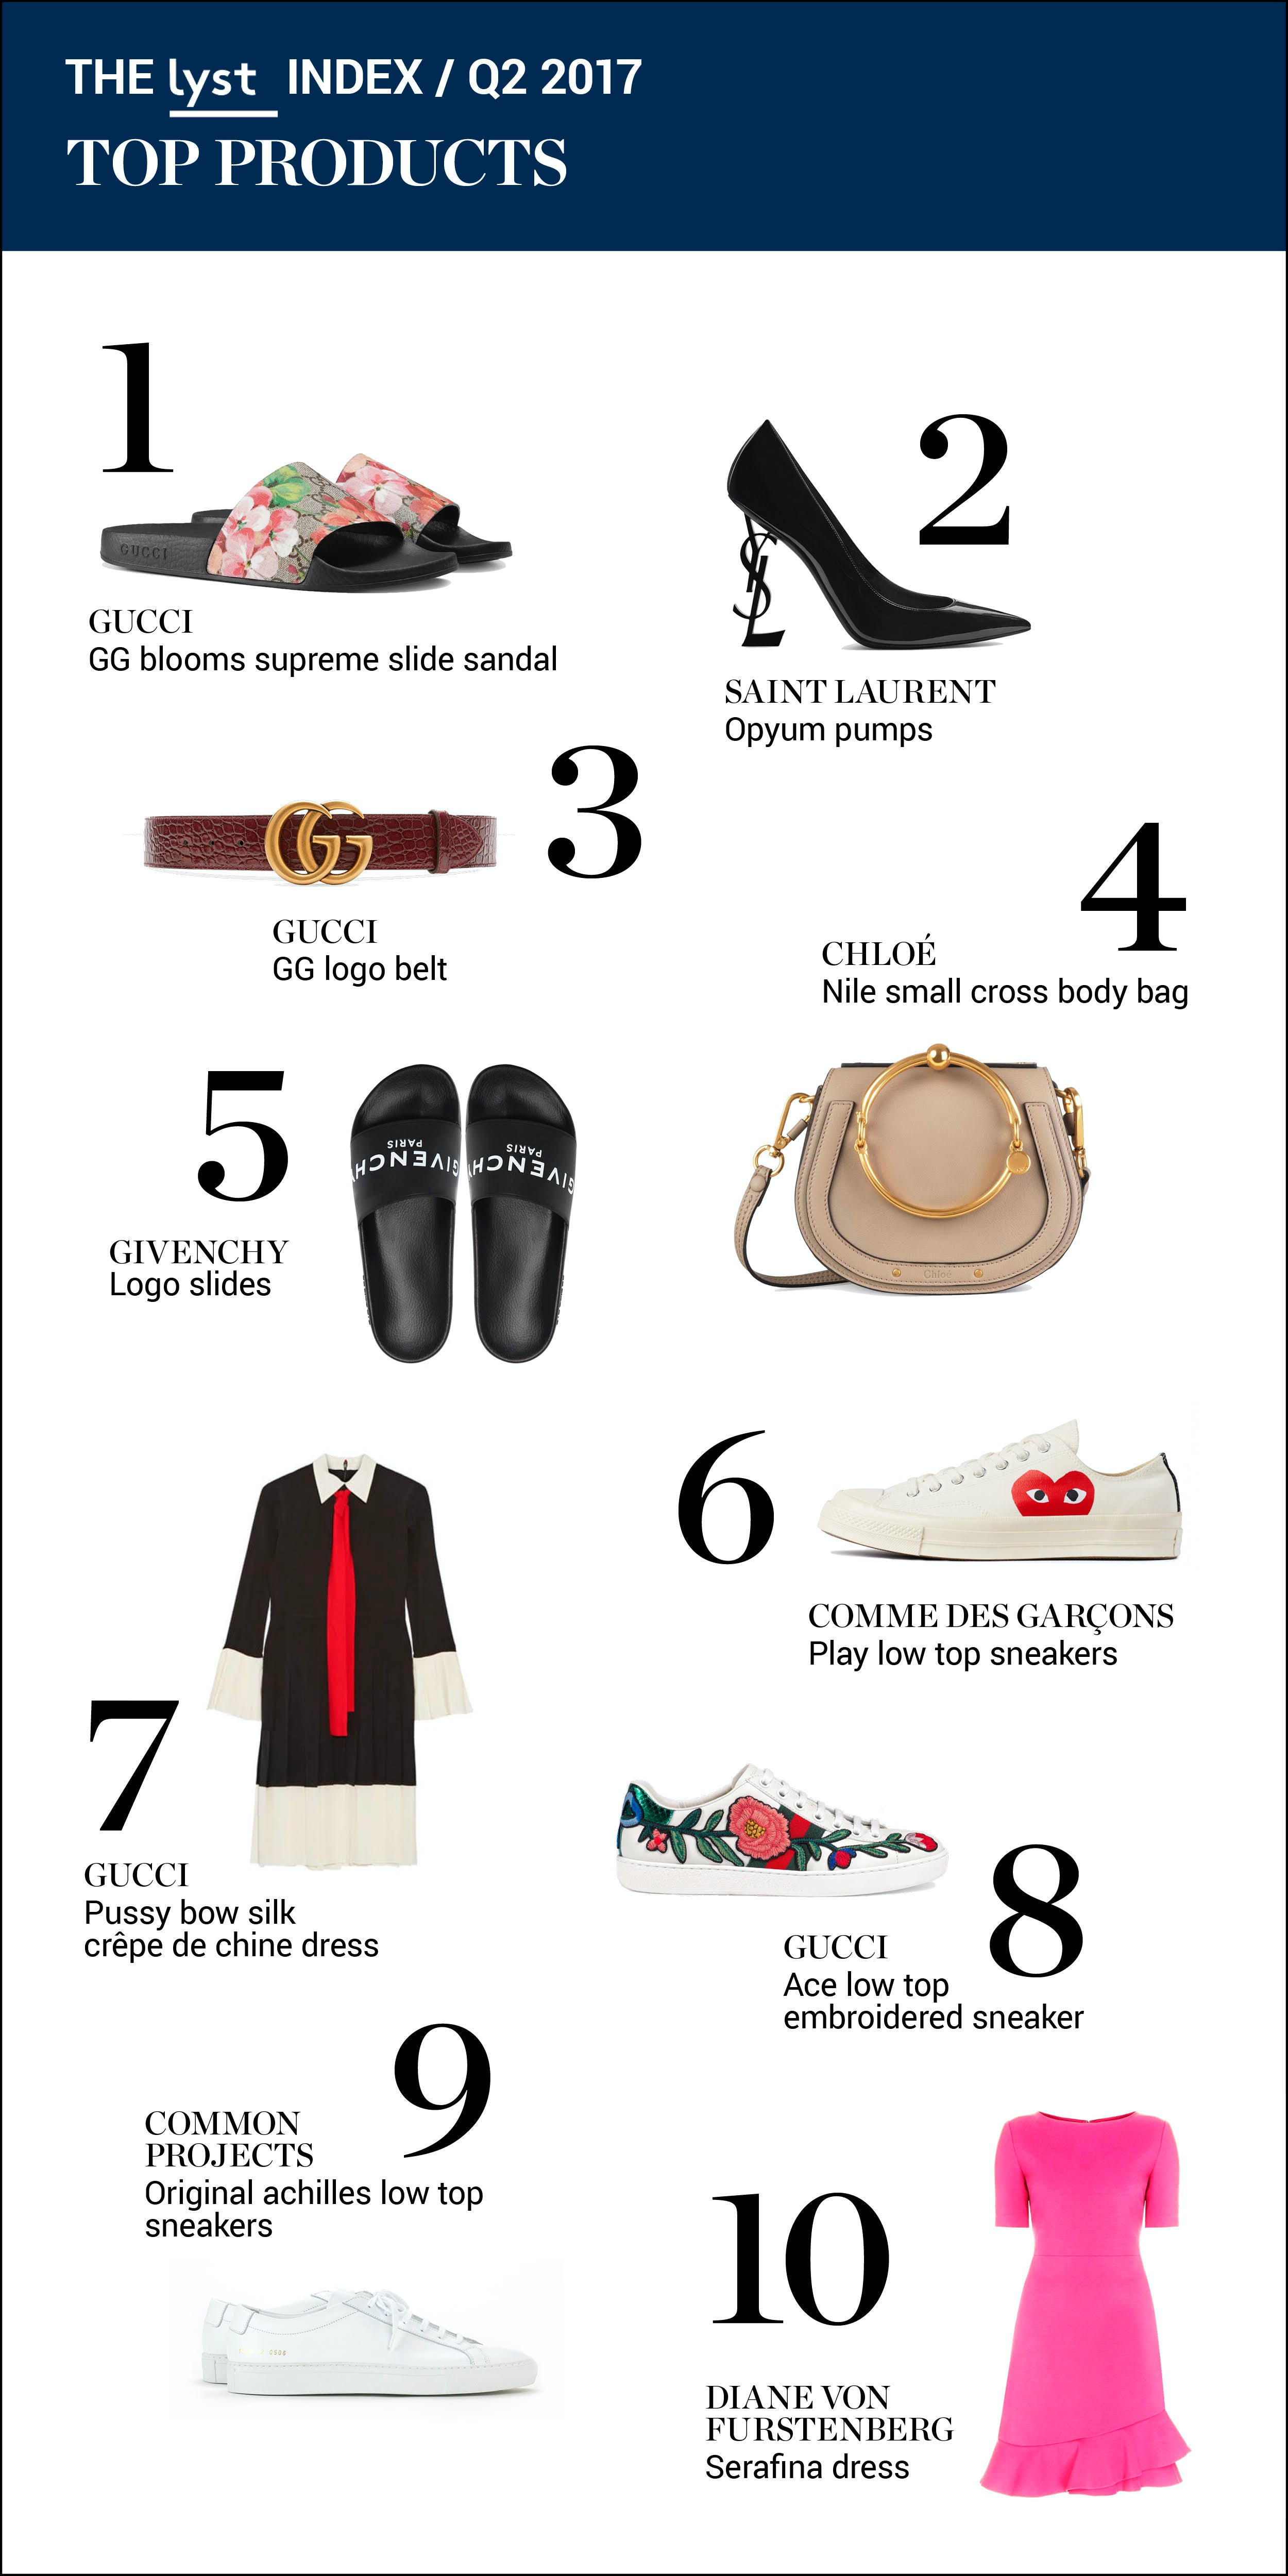 Why is Gucci so expensive besides the brand name? - Quora